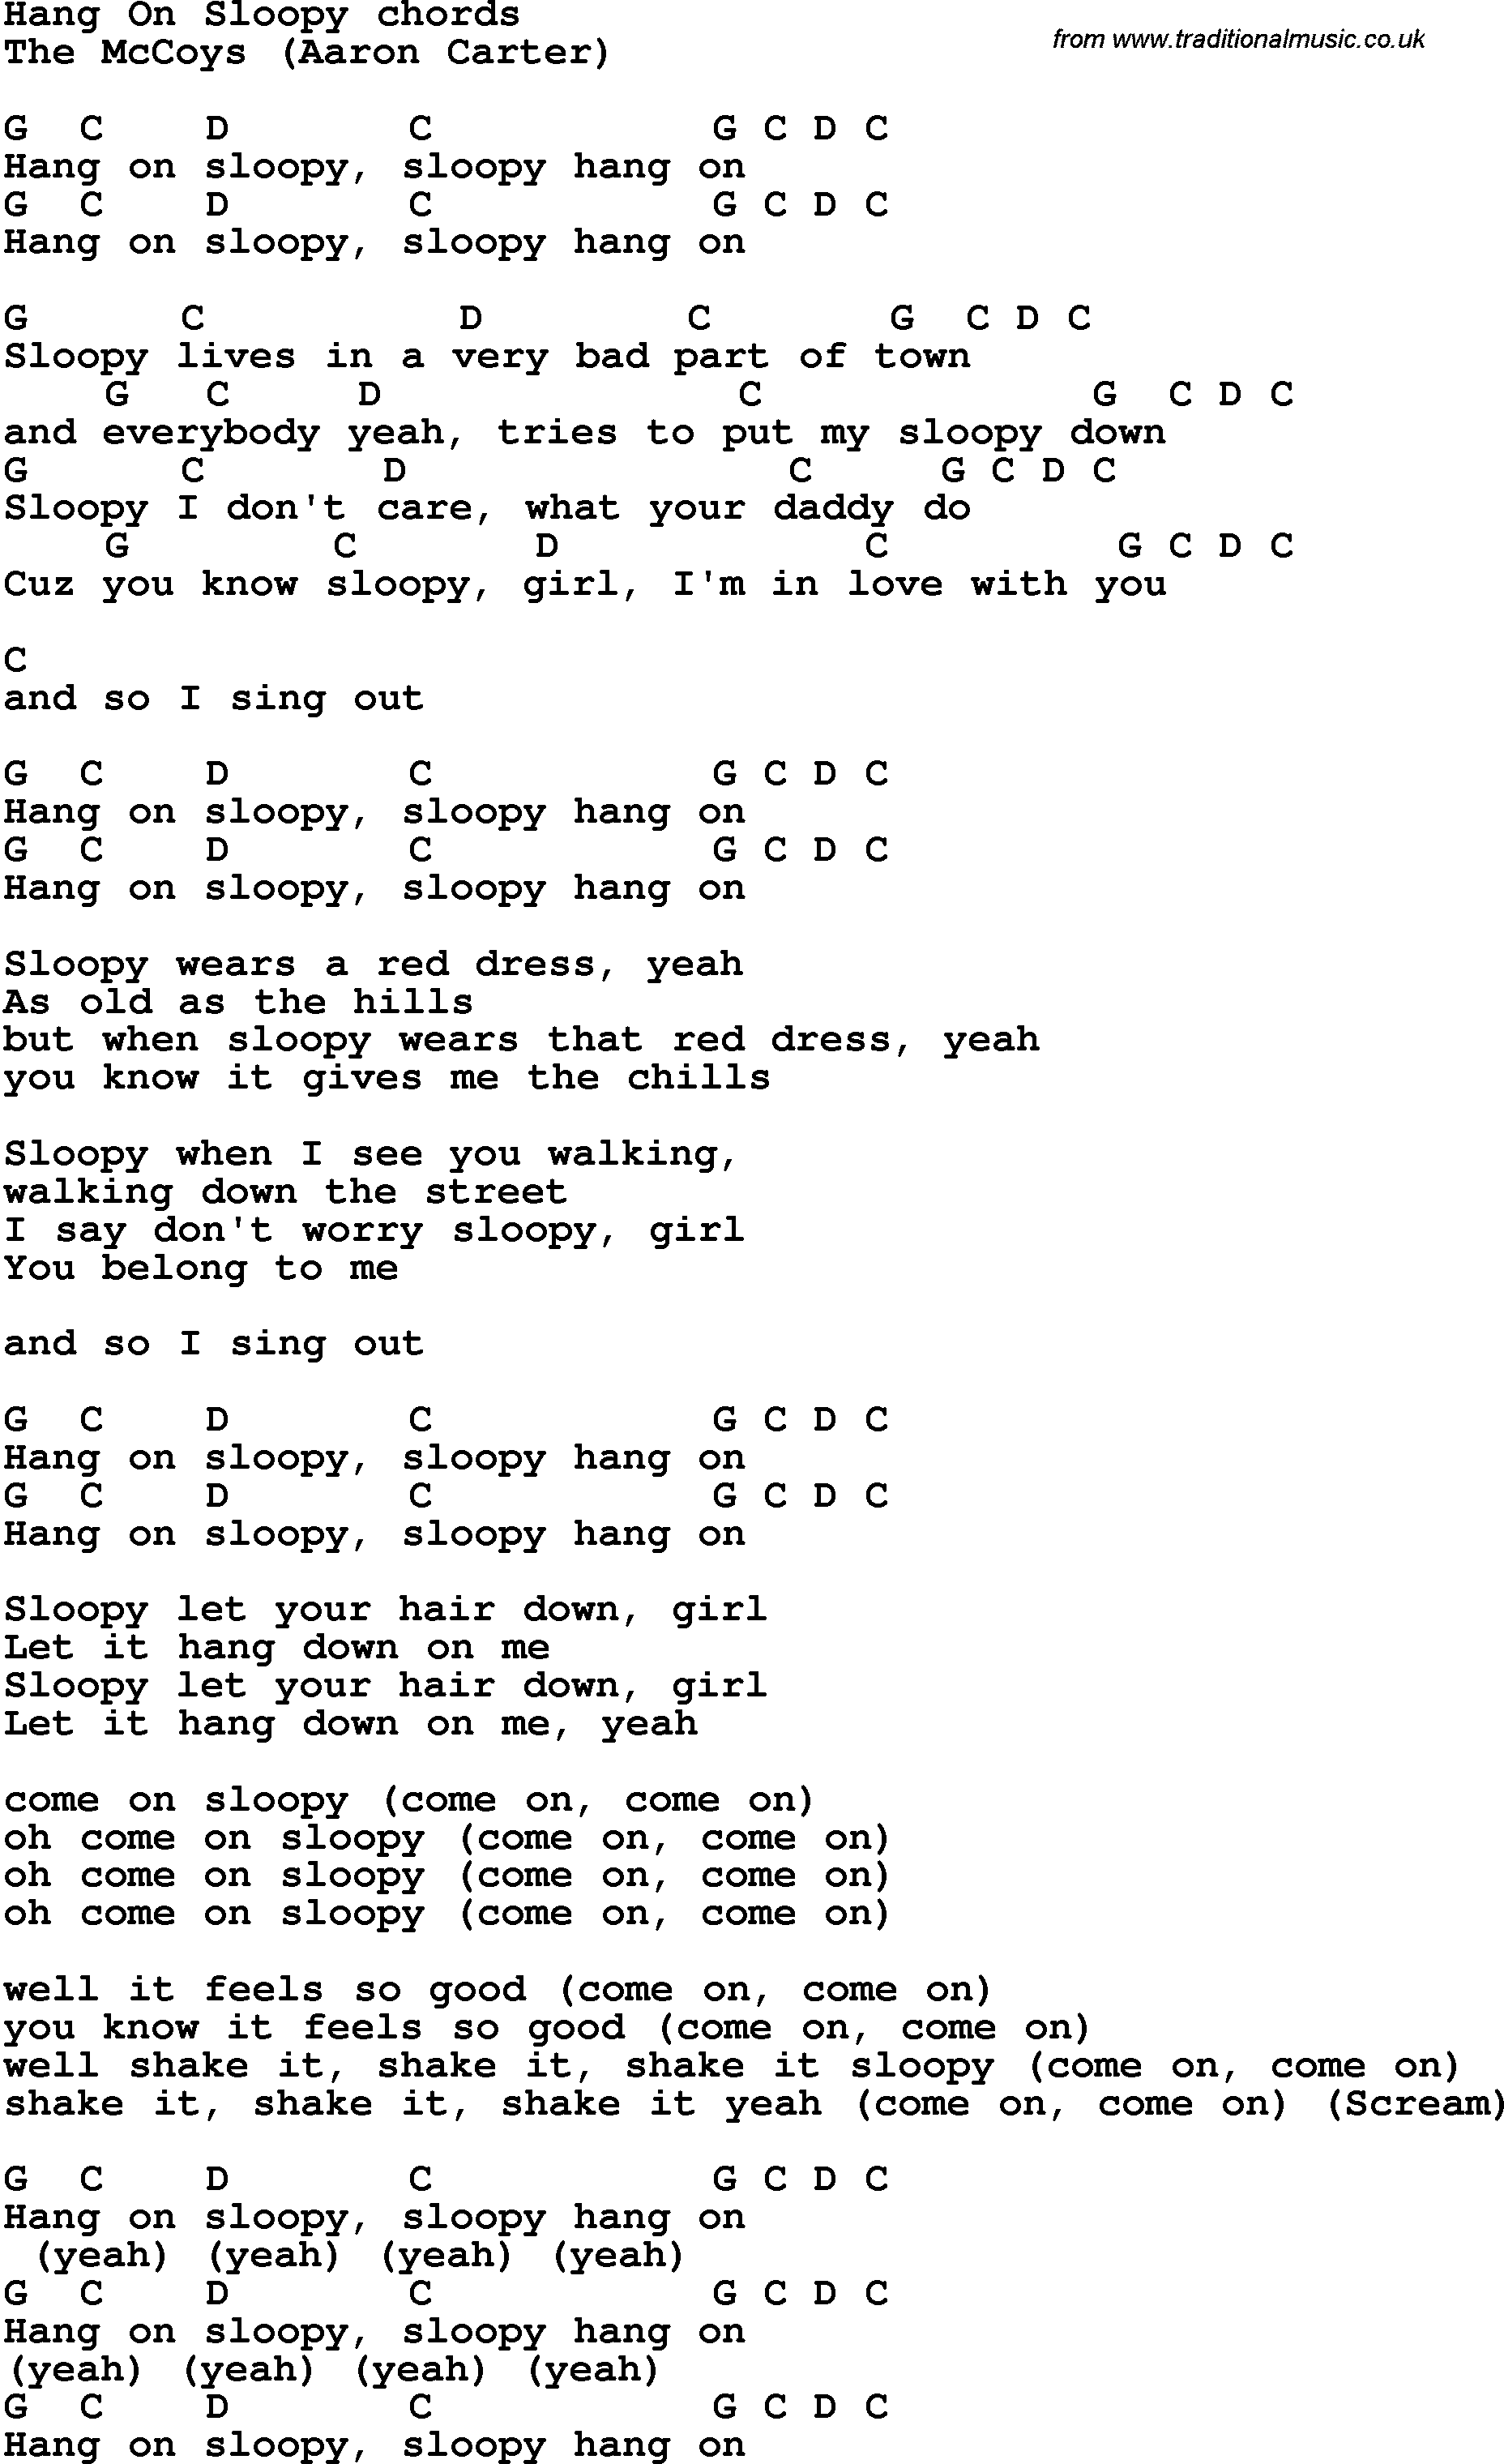 Song Lyrics with guitar chords for Hang On Sloopy